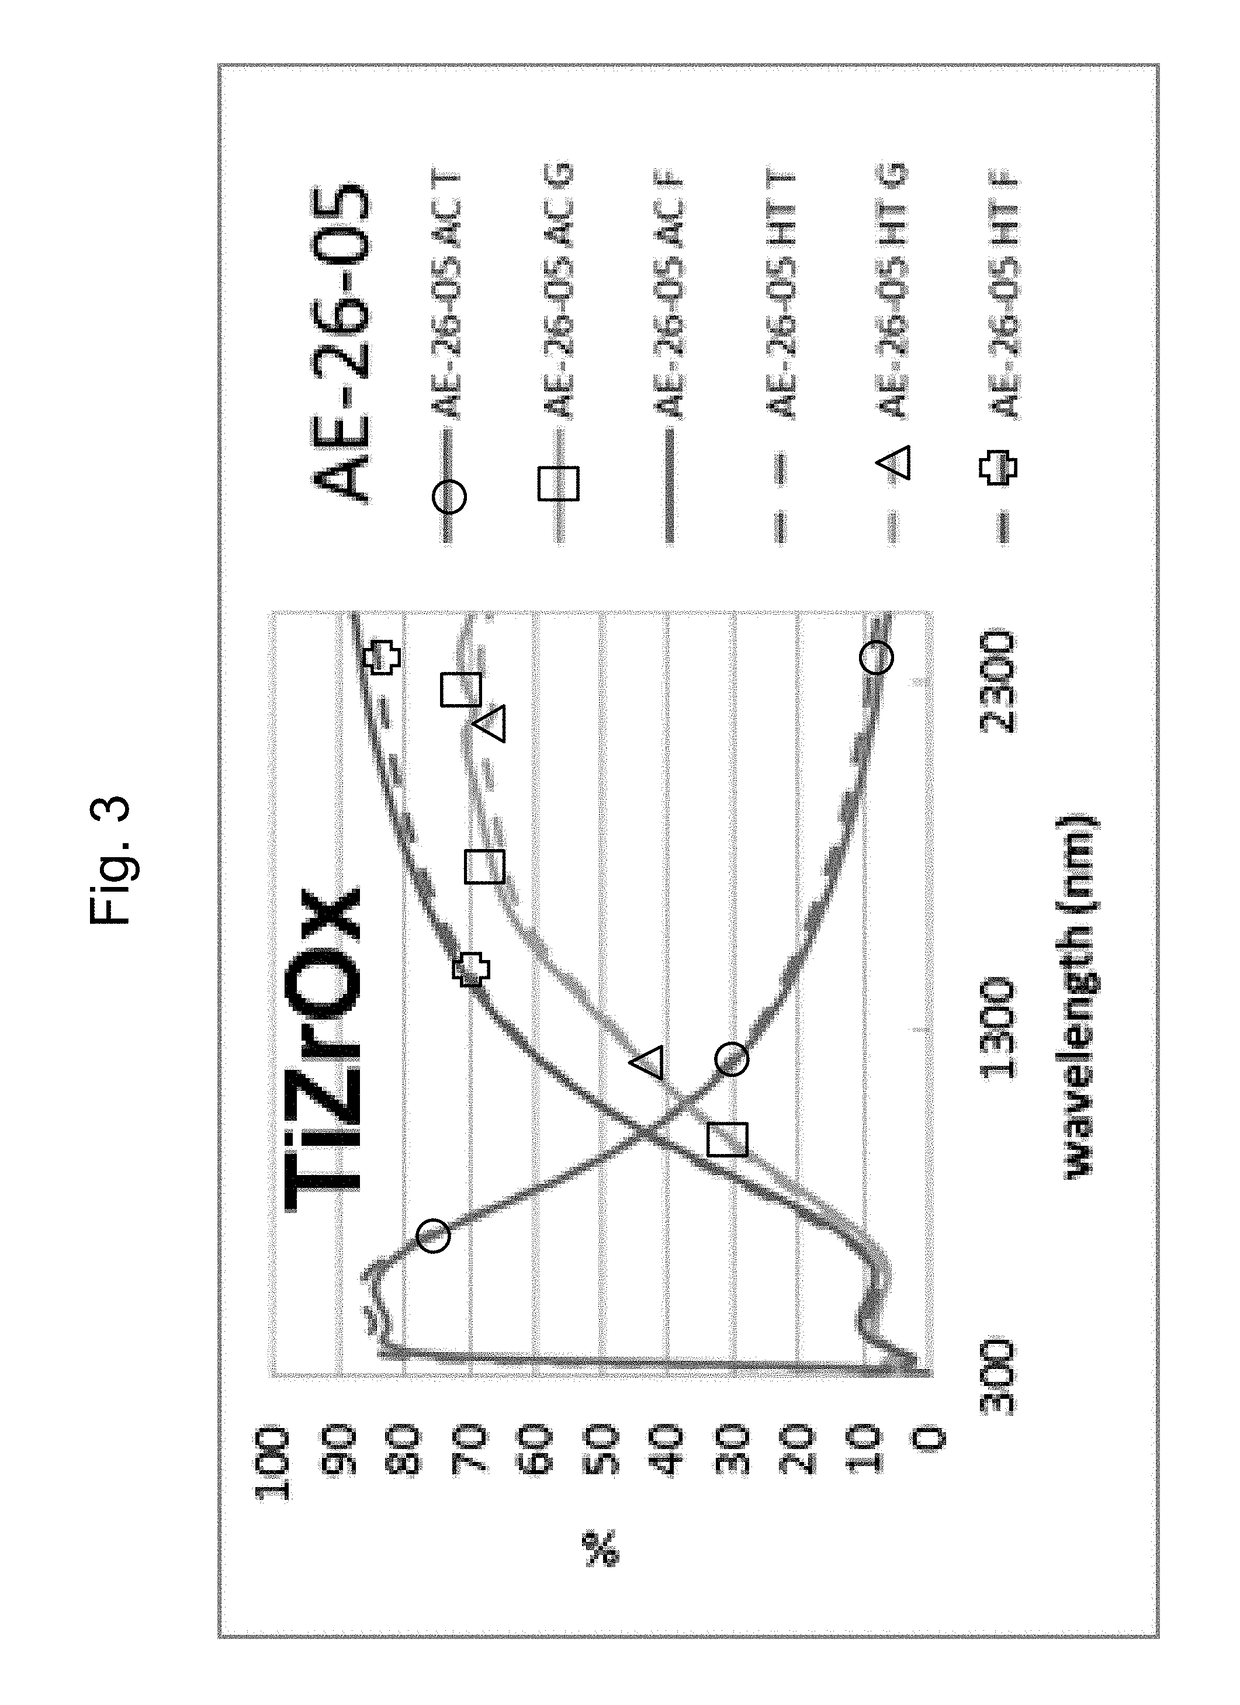 Coated article having low-e coating with ir reflecting layer(s) and doped titanium oxide dielectric layer(s) and method of making same